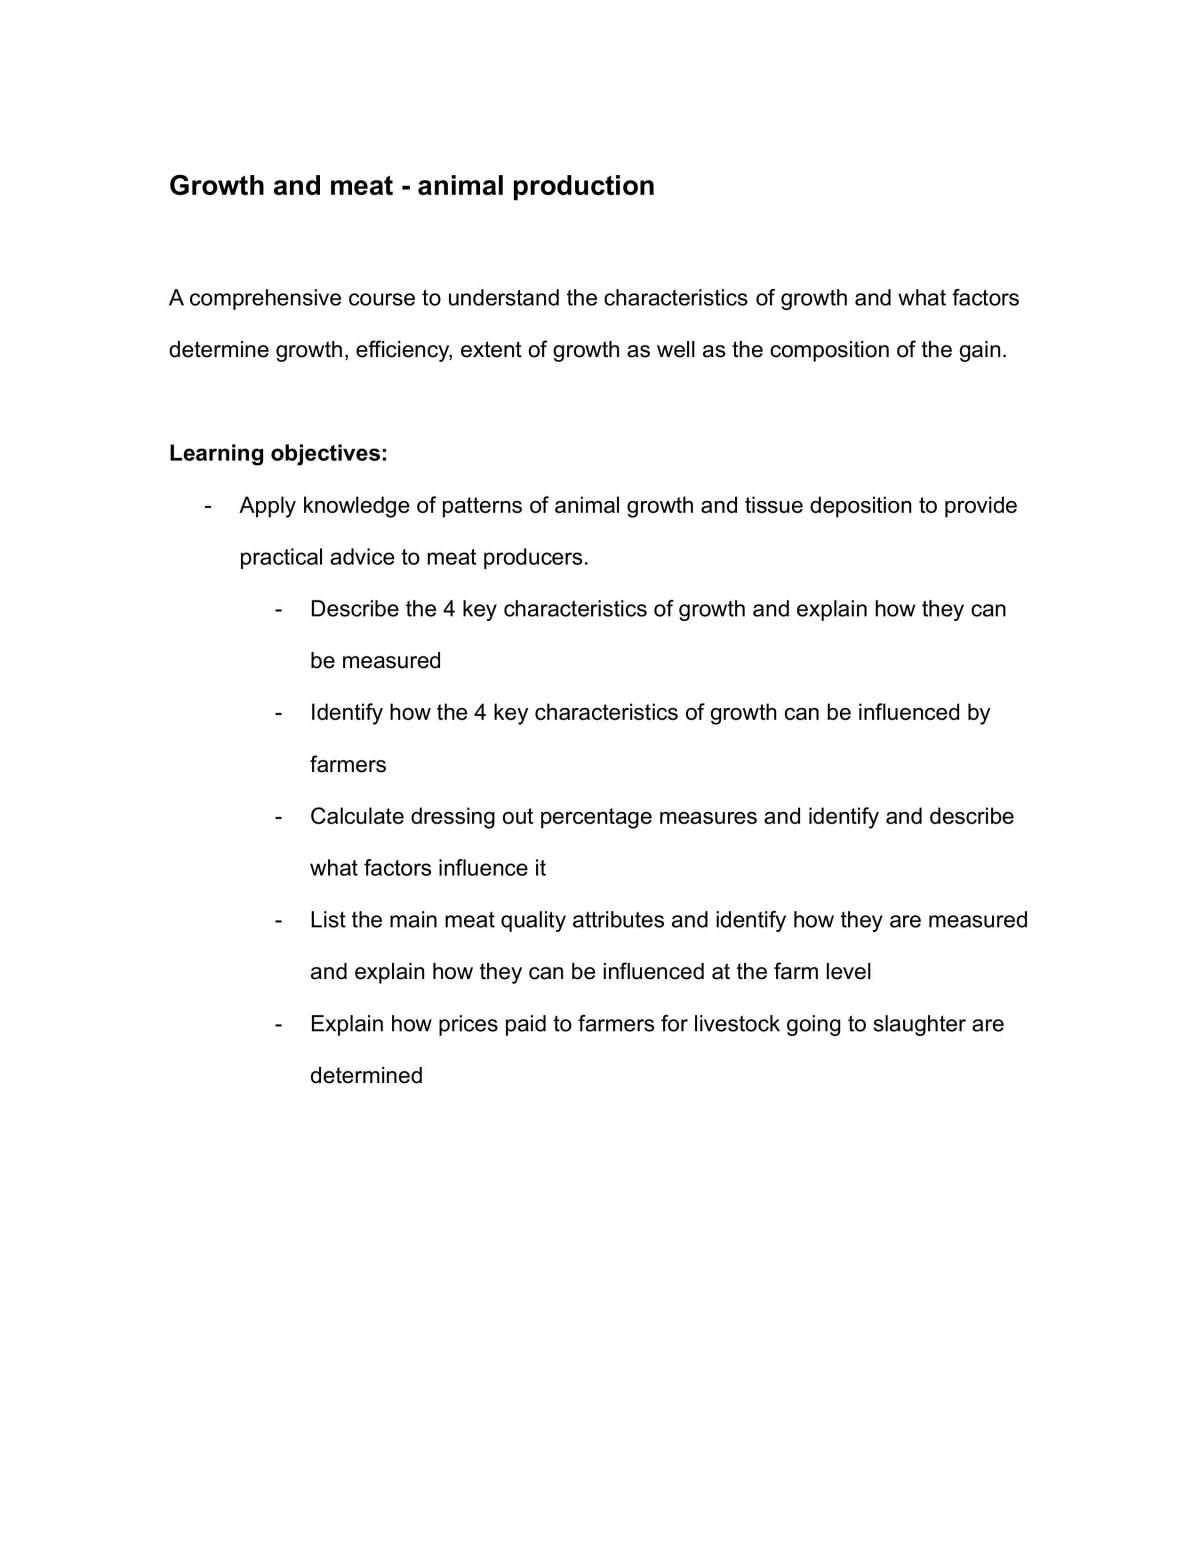 Growth and meat - animal production - Page 1